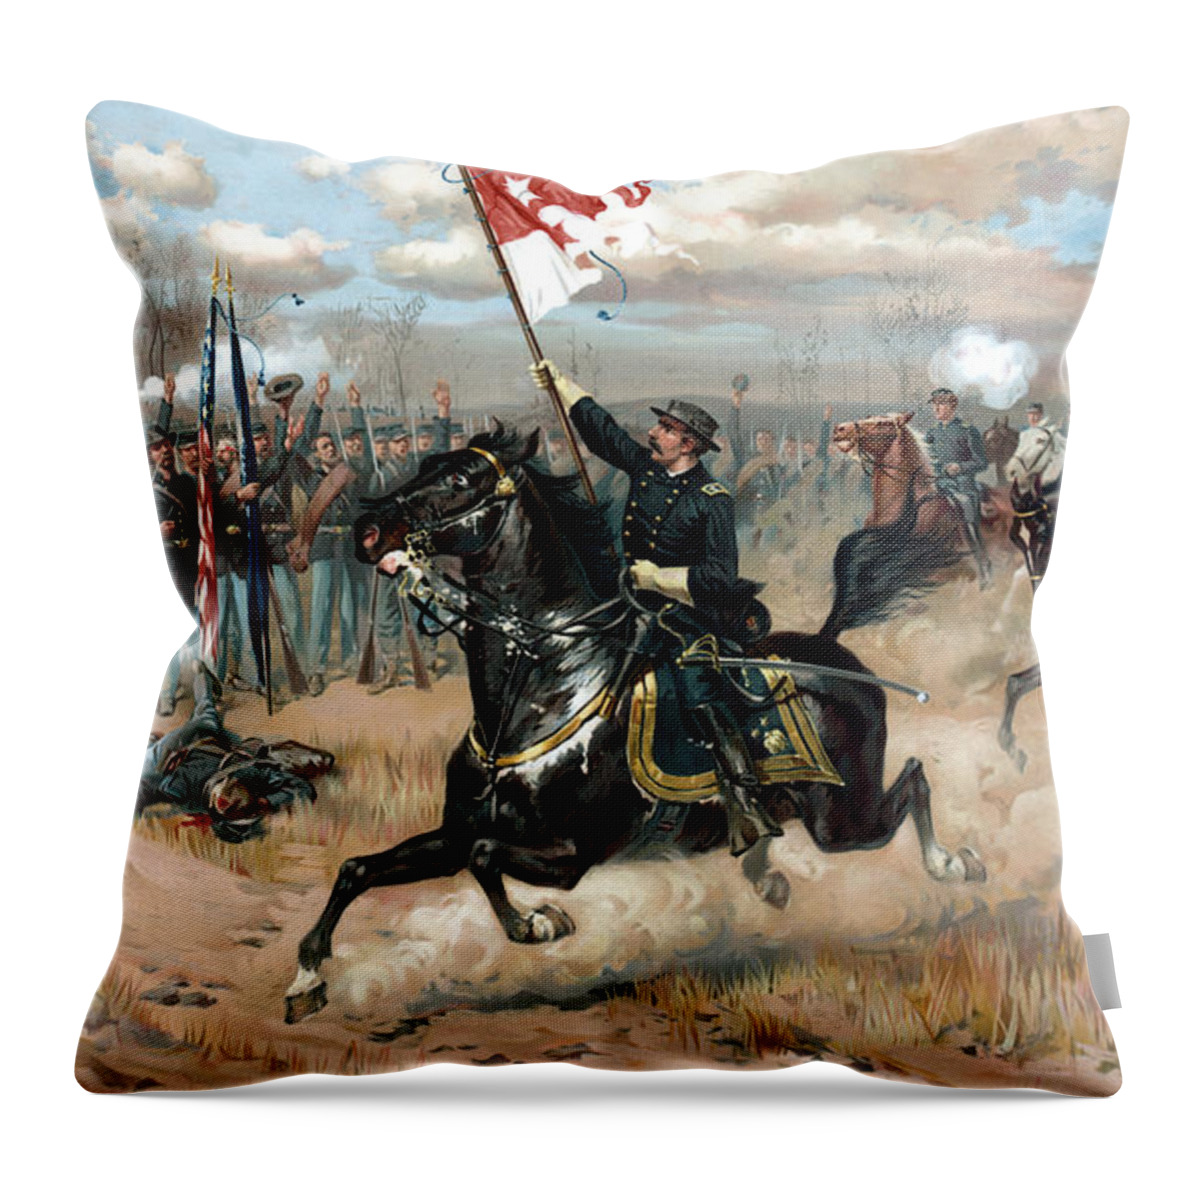 Sheridans Ride Throw Pillow featuring the painting Sheridan's Ride by War Is Hell Store